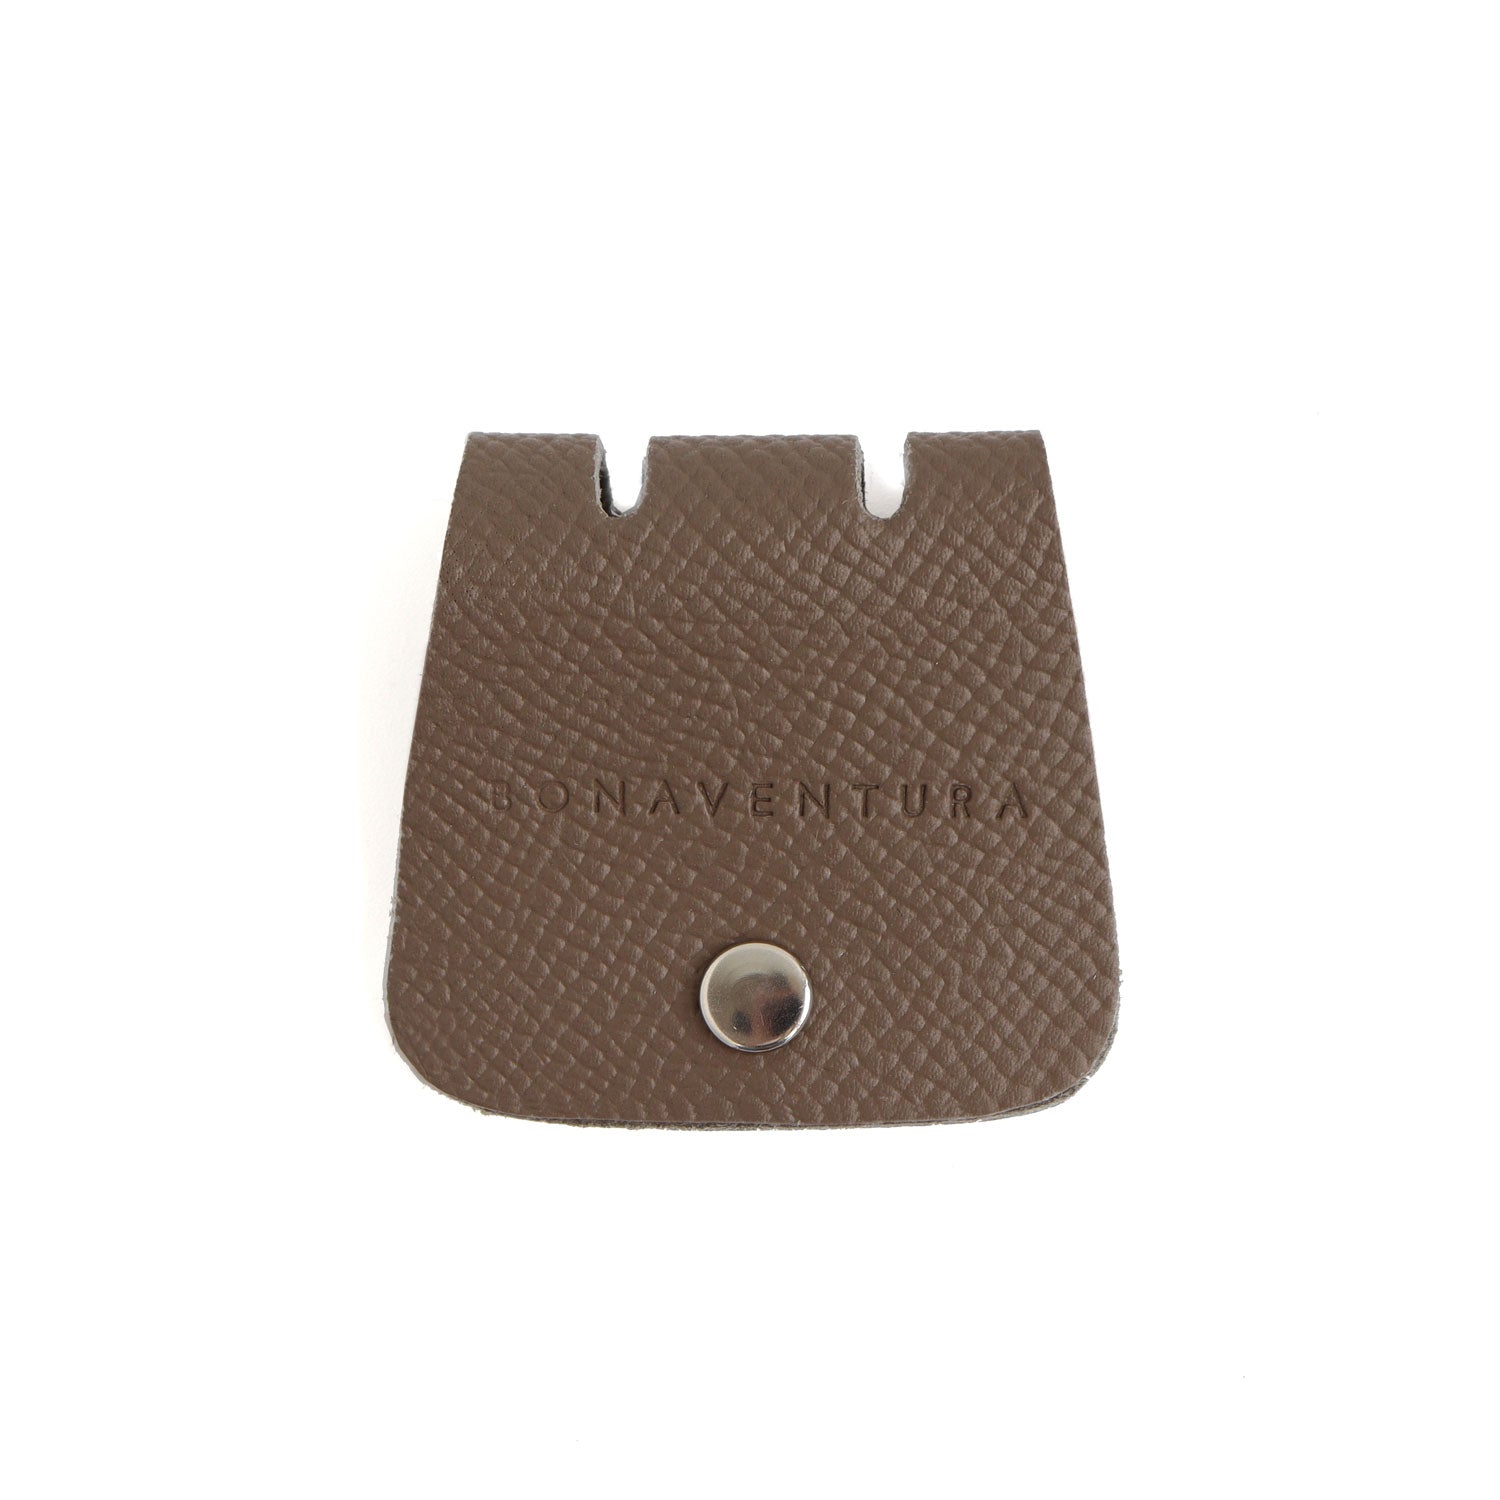 Cable holder in Noblesse leather